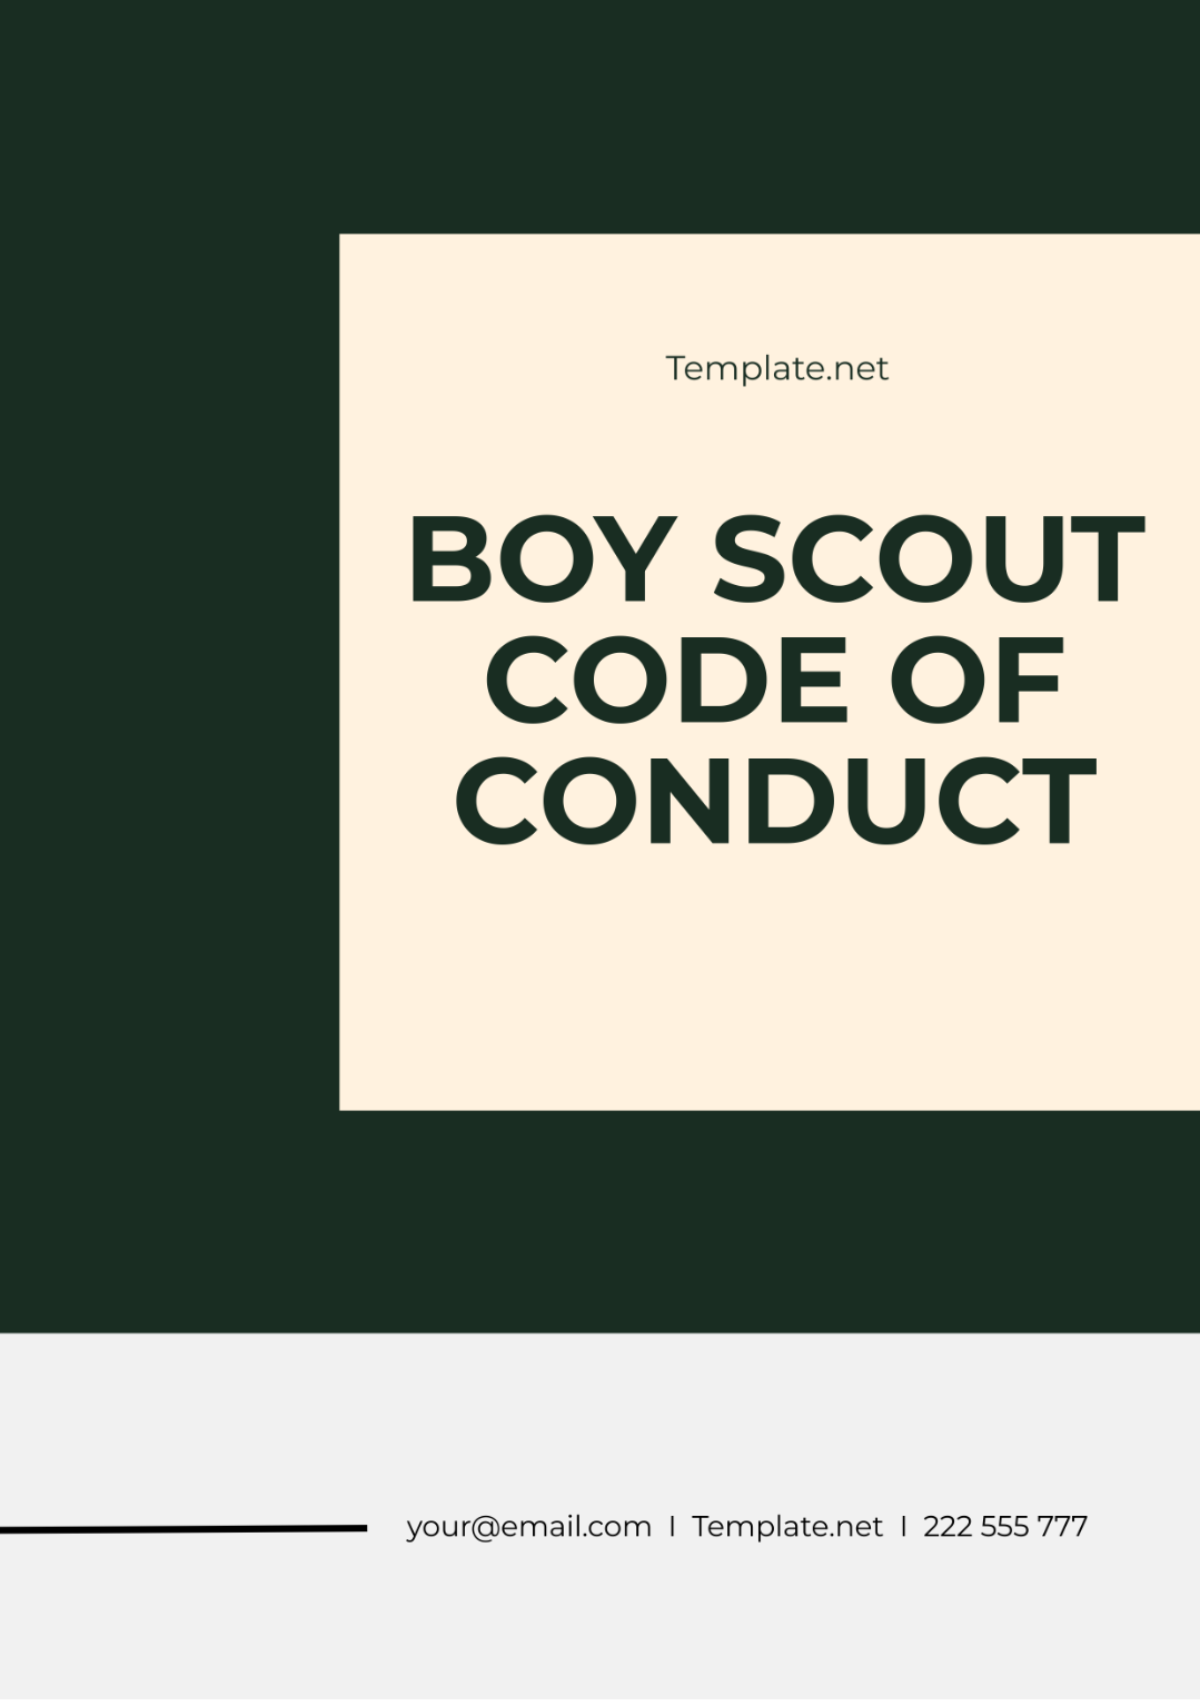 Boy Scout Code of Conduct Template